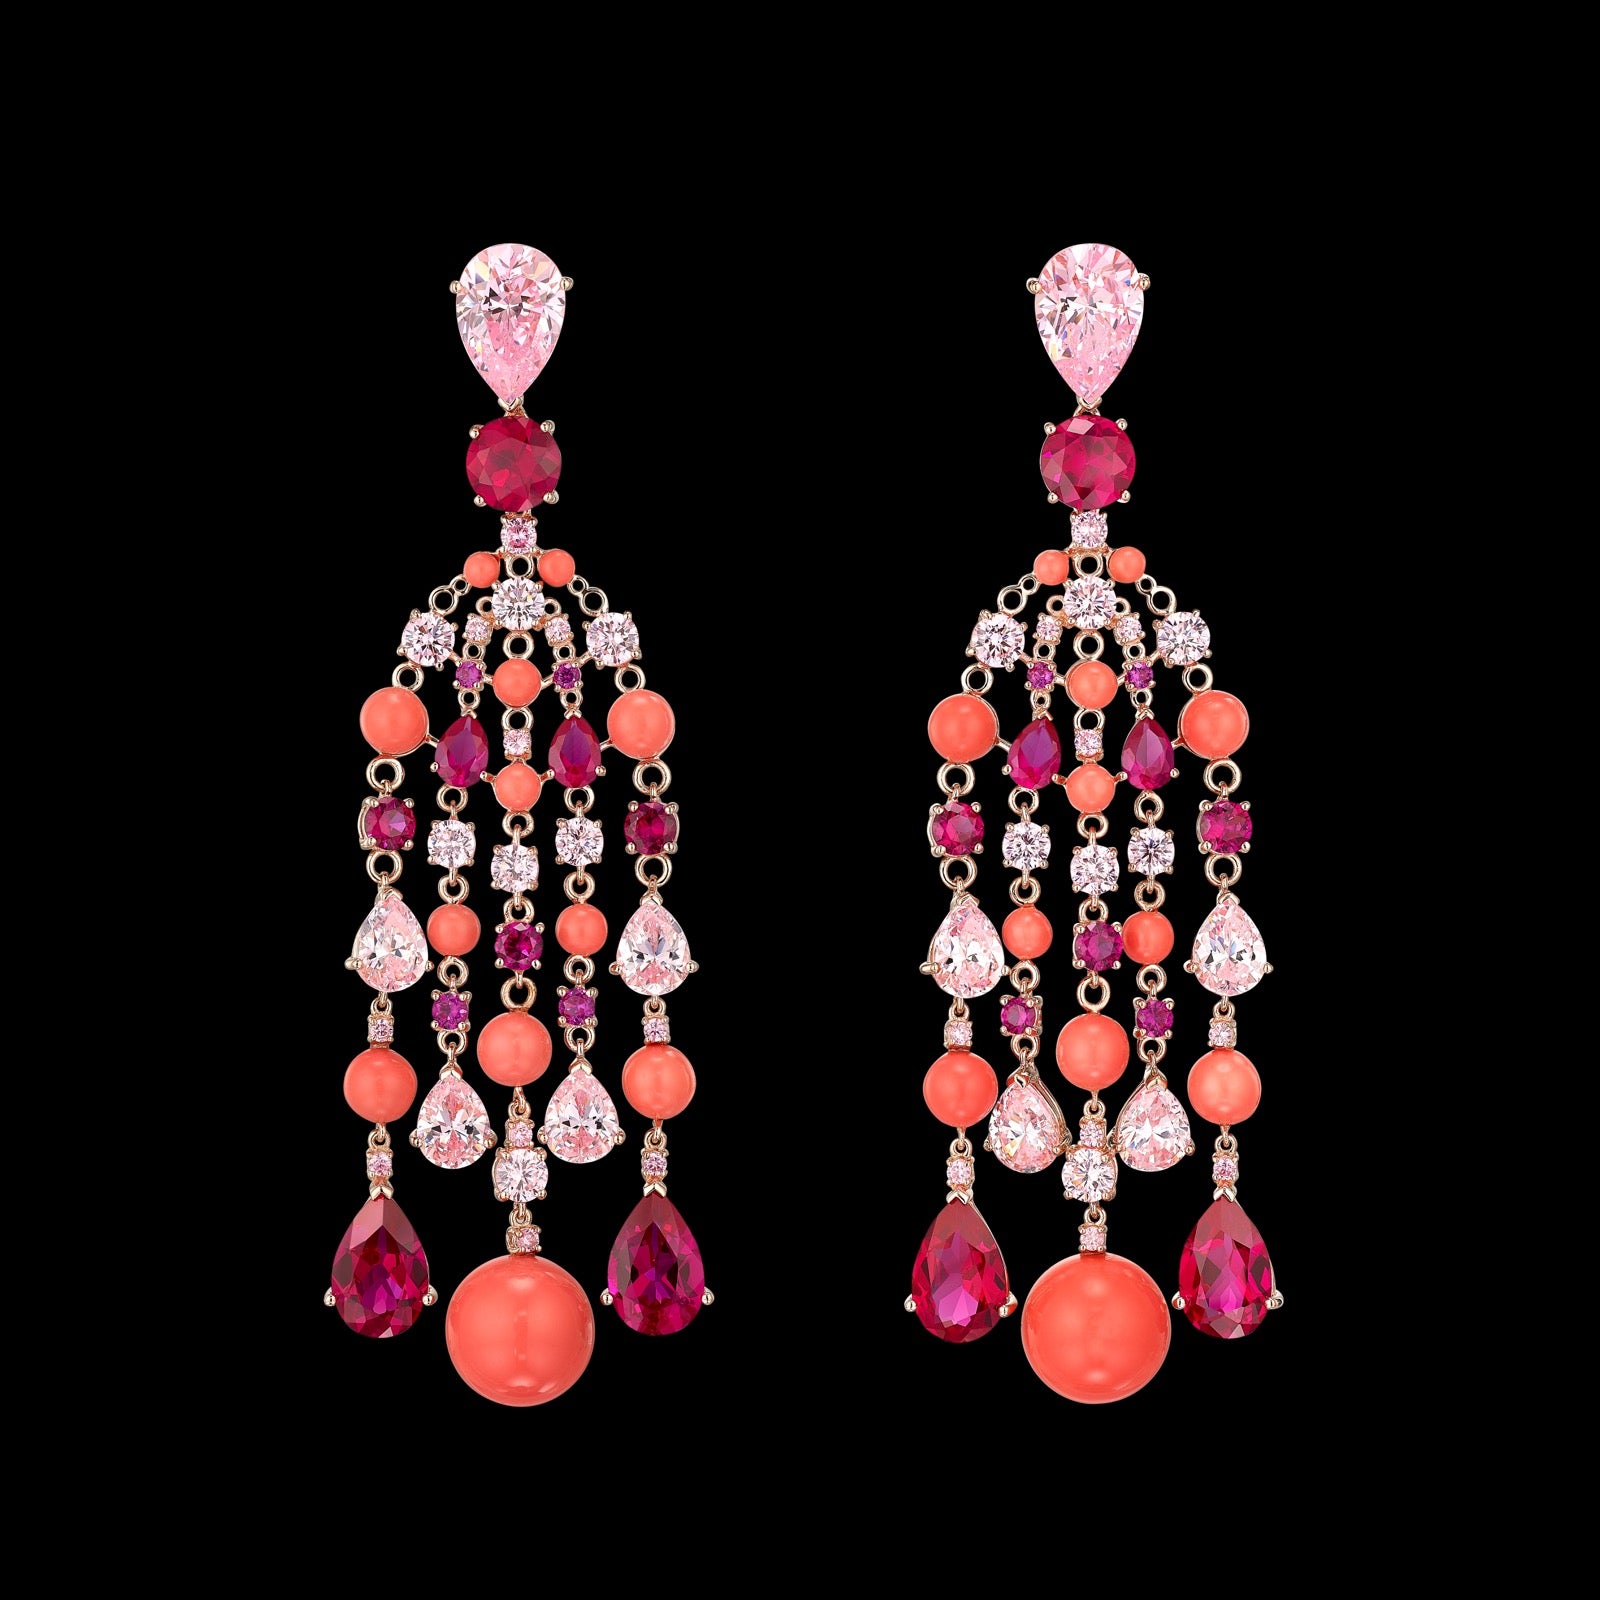 Coral Raindrop Earrings, Earrings, Anabela Chan Joaillerie - Fine jewelry with laboratory grown and created gemstones hand-crafted in the United Kingdom. Anabela Chan Joaillerie is the first fine jewellery brand in the world to champion laboratory-grown and created gemstones with high jewellery design, artisanal craftsmanship and a focus on ethical and sustainable innovations.